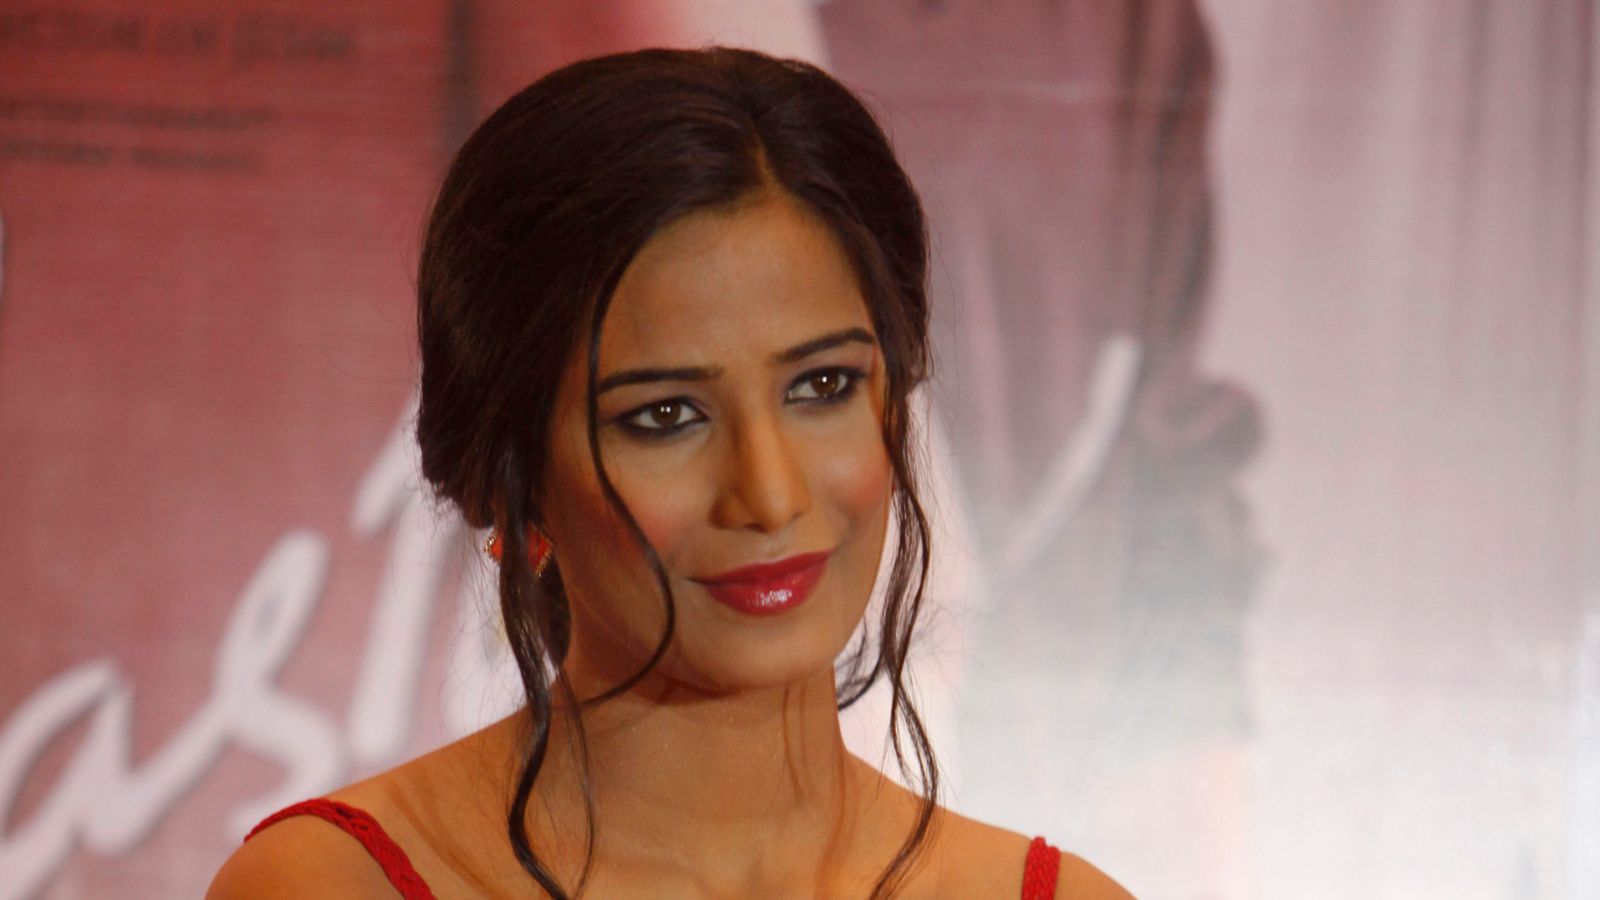 Indian model Poonam Pandey faked death from cervical cancer to raise awareness about the disease |  World News